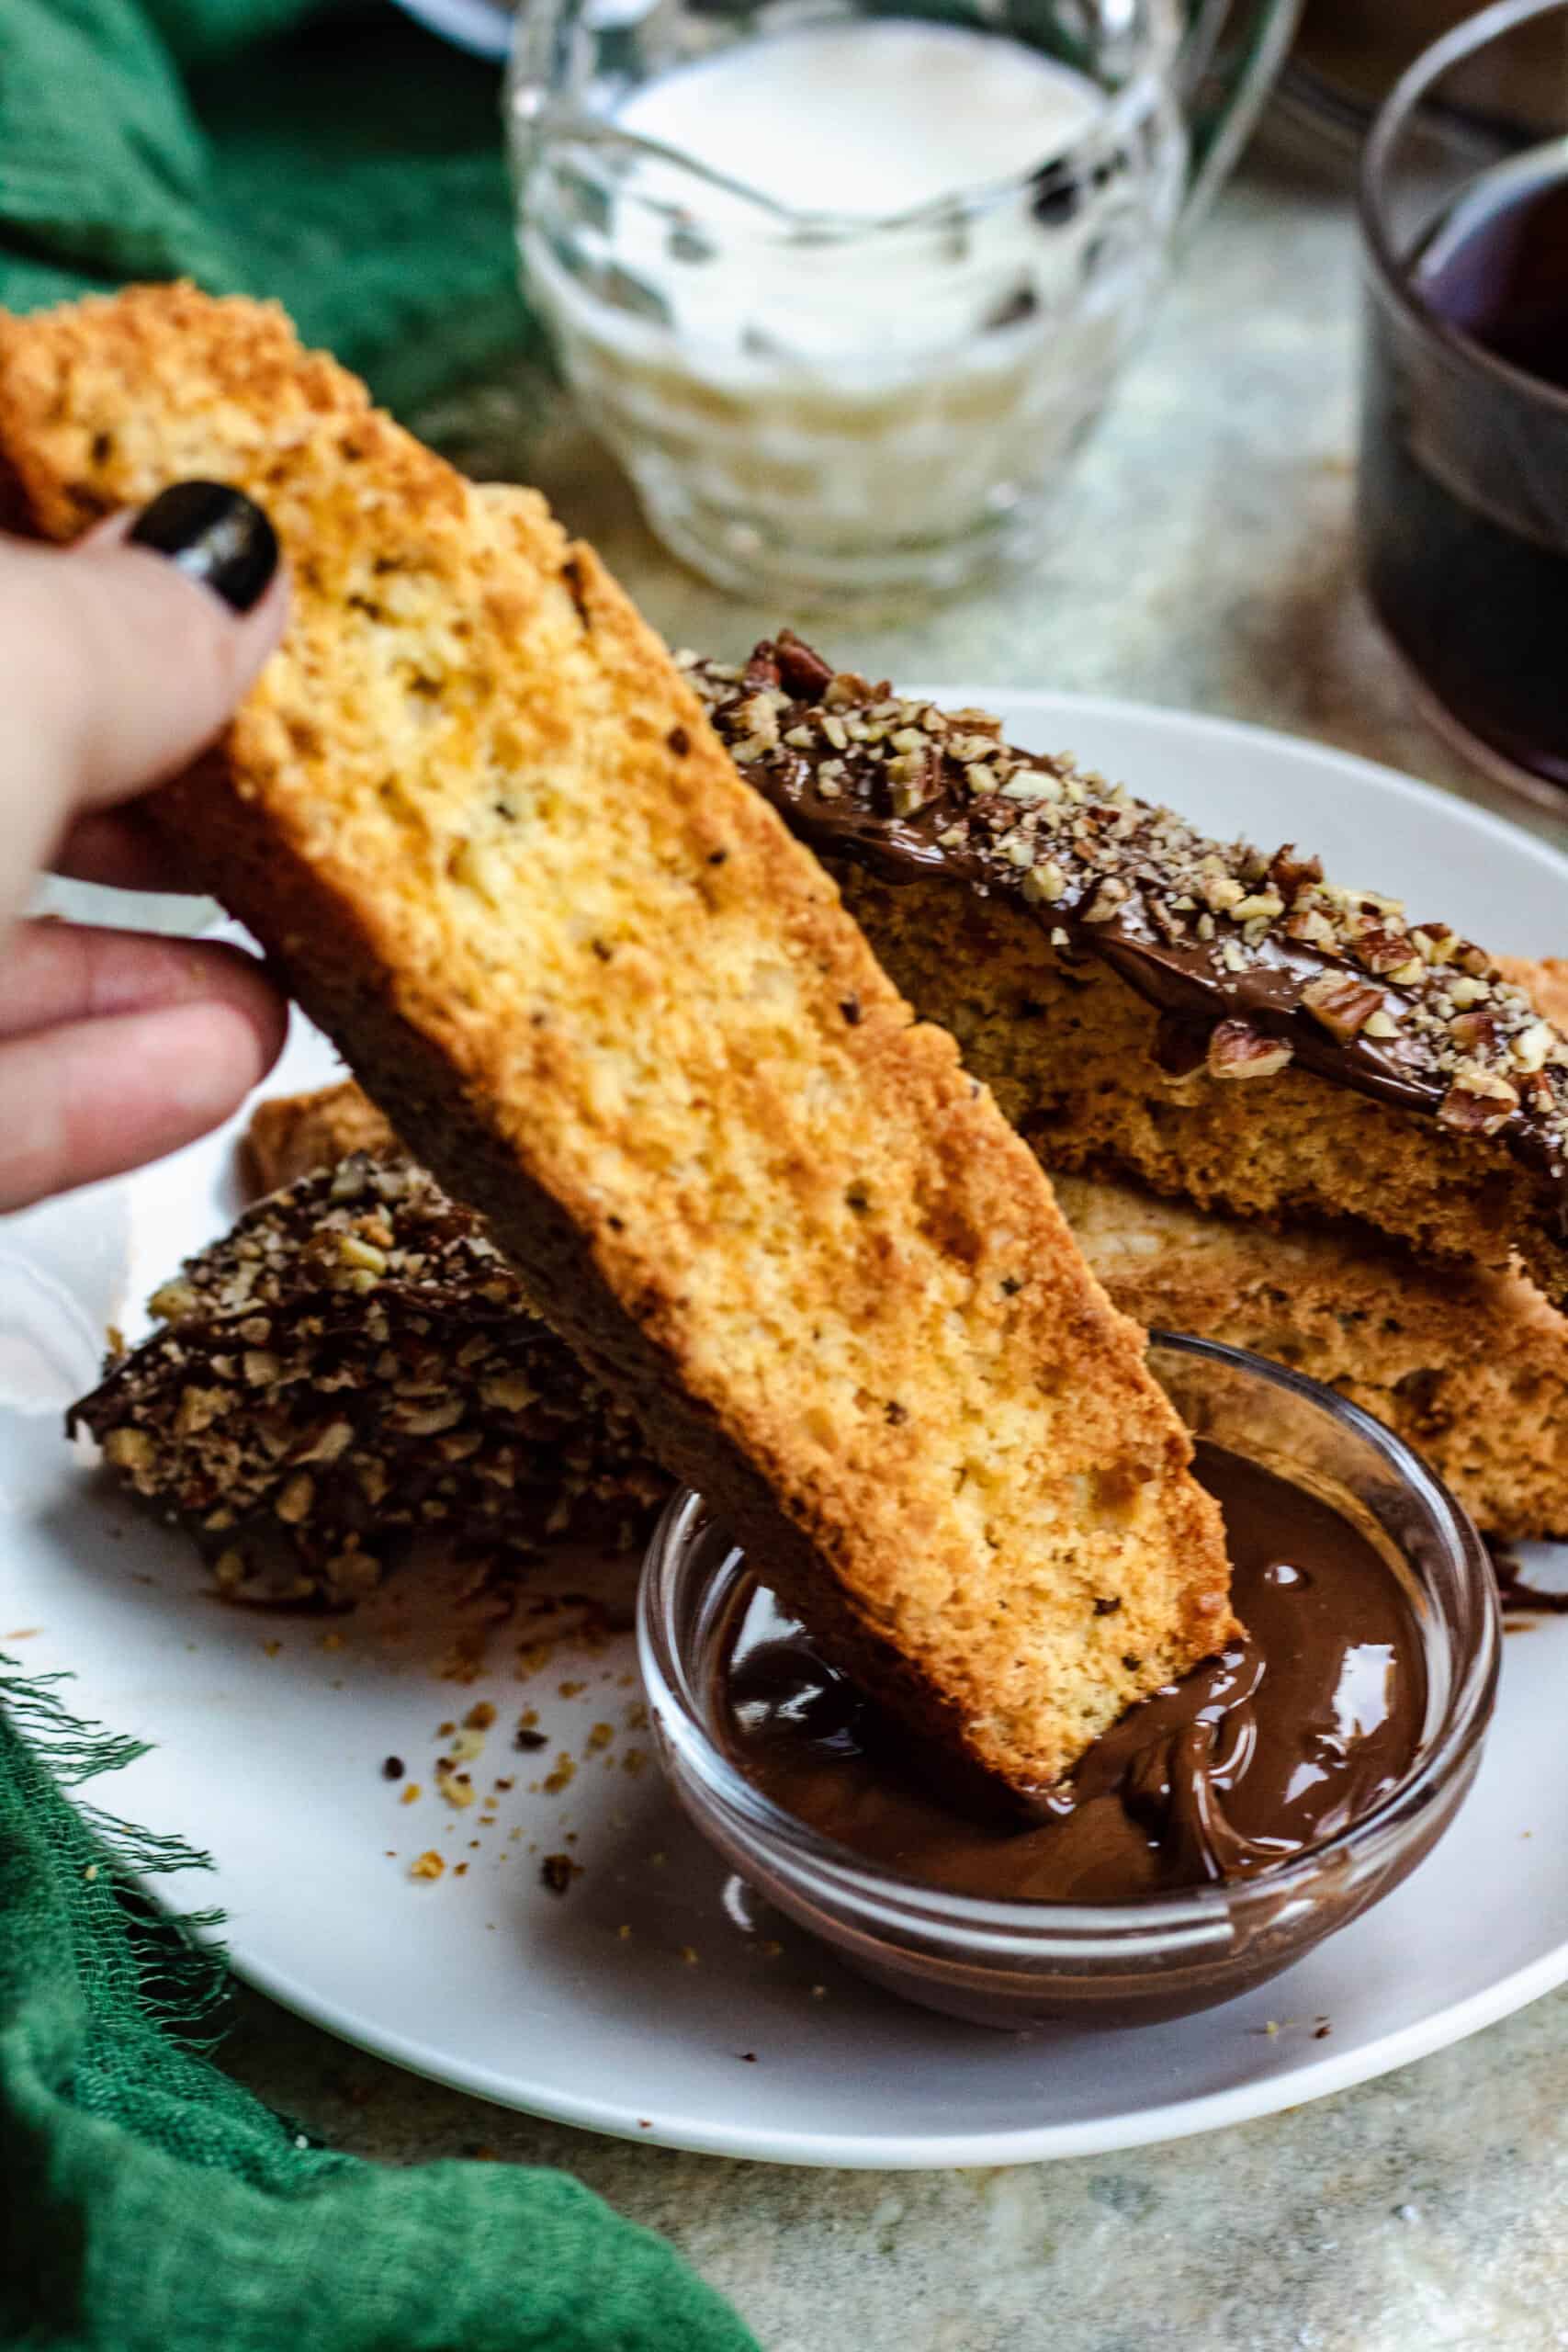 House Biscotti • Cook Til Delicious